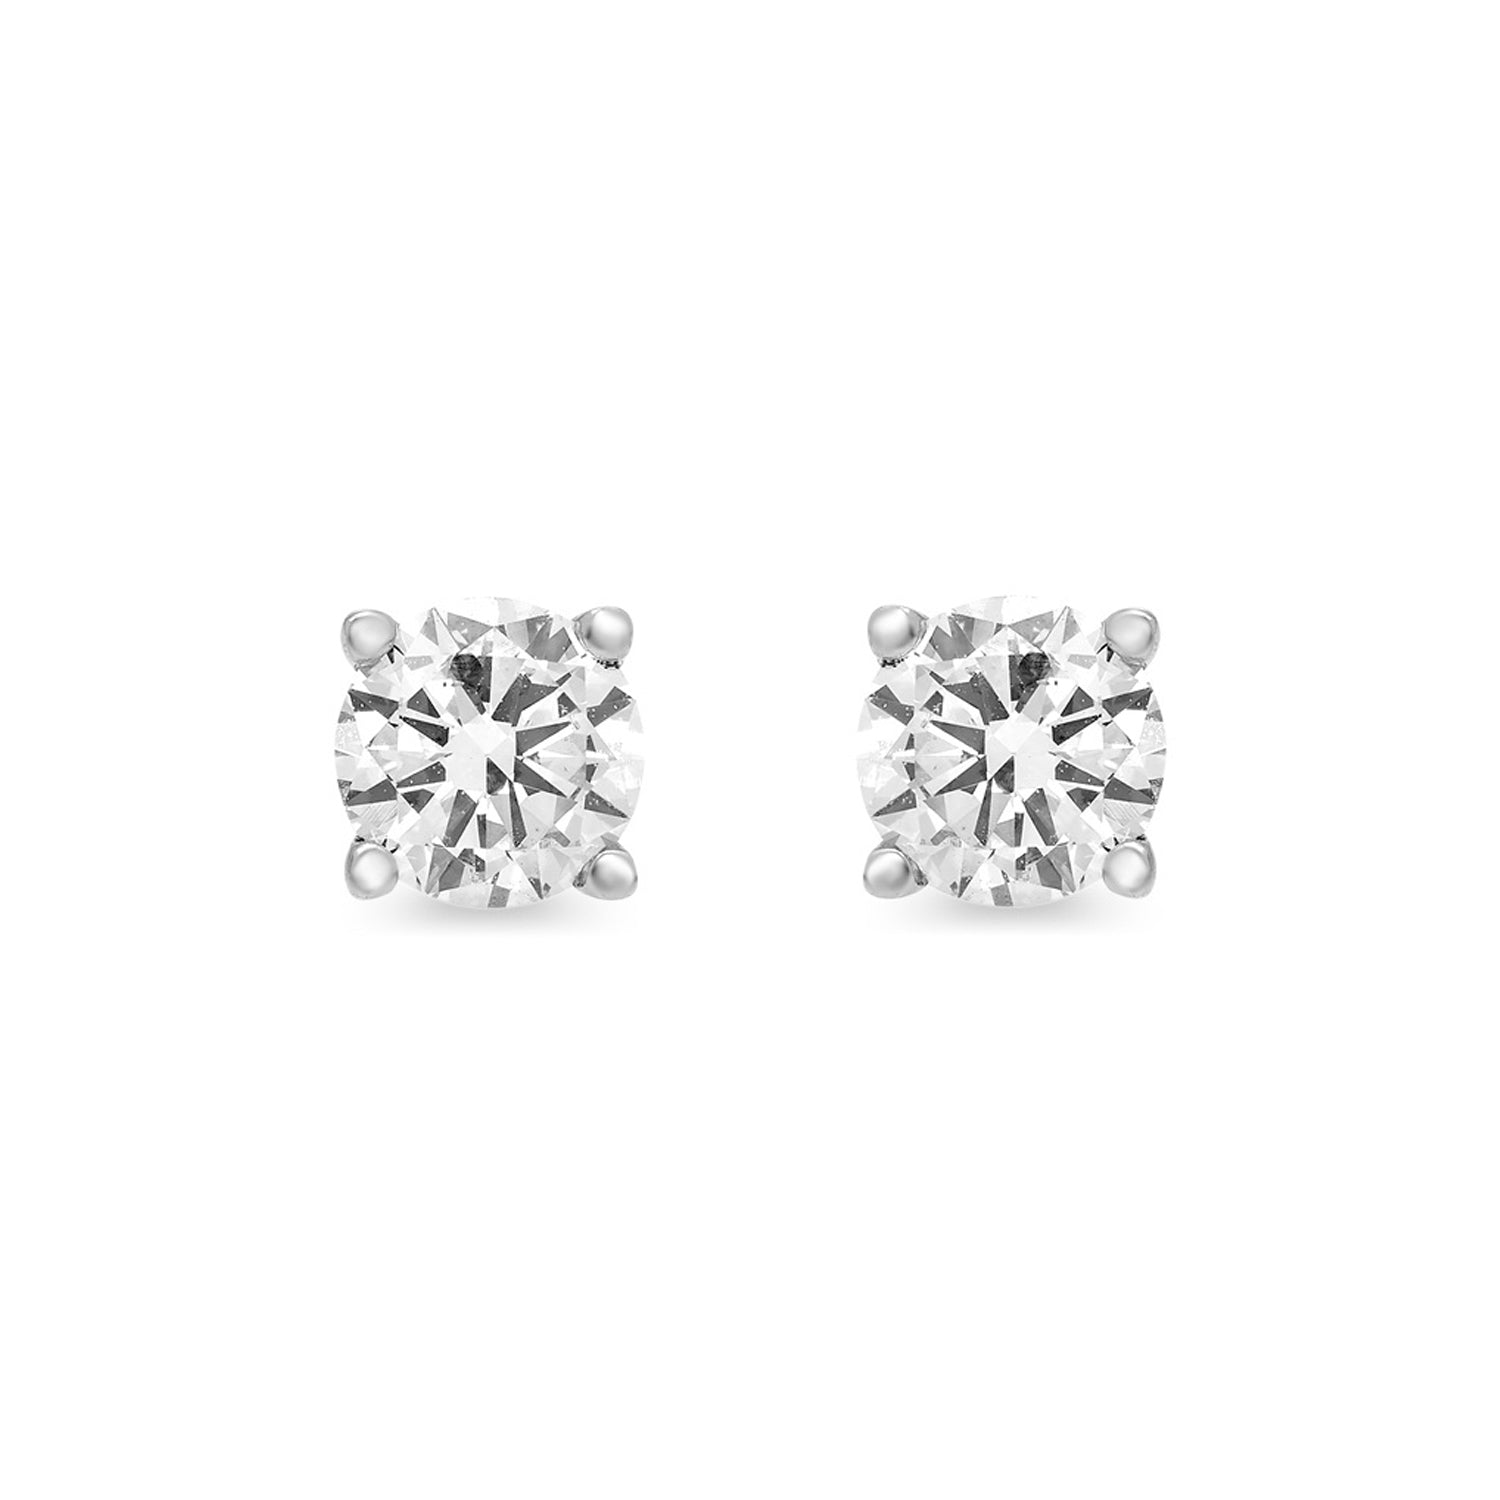 1/2 Carat tw 6 Prong Round Diamond Solitaire Stud Earrings in 14K Yellow Gold (k-l Color, I2-i3 Clarity), Women's, Size: One size, White